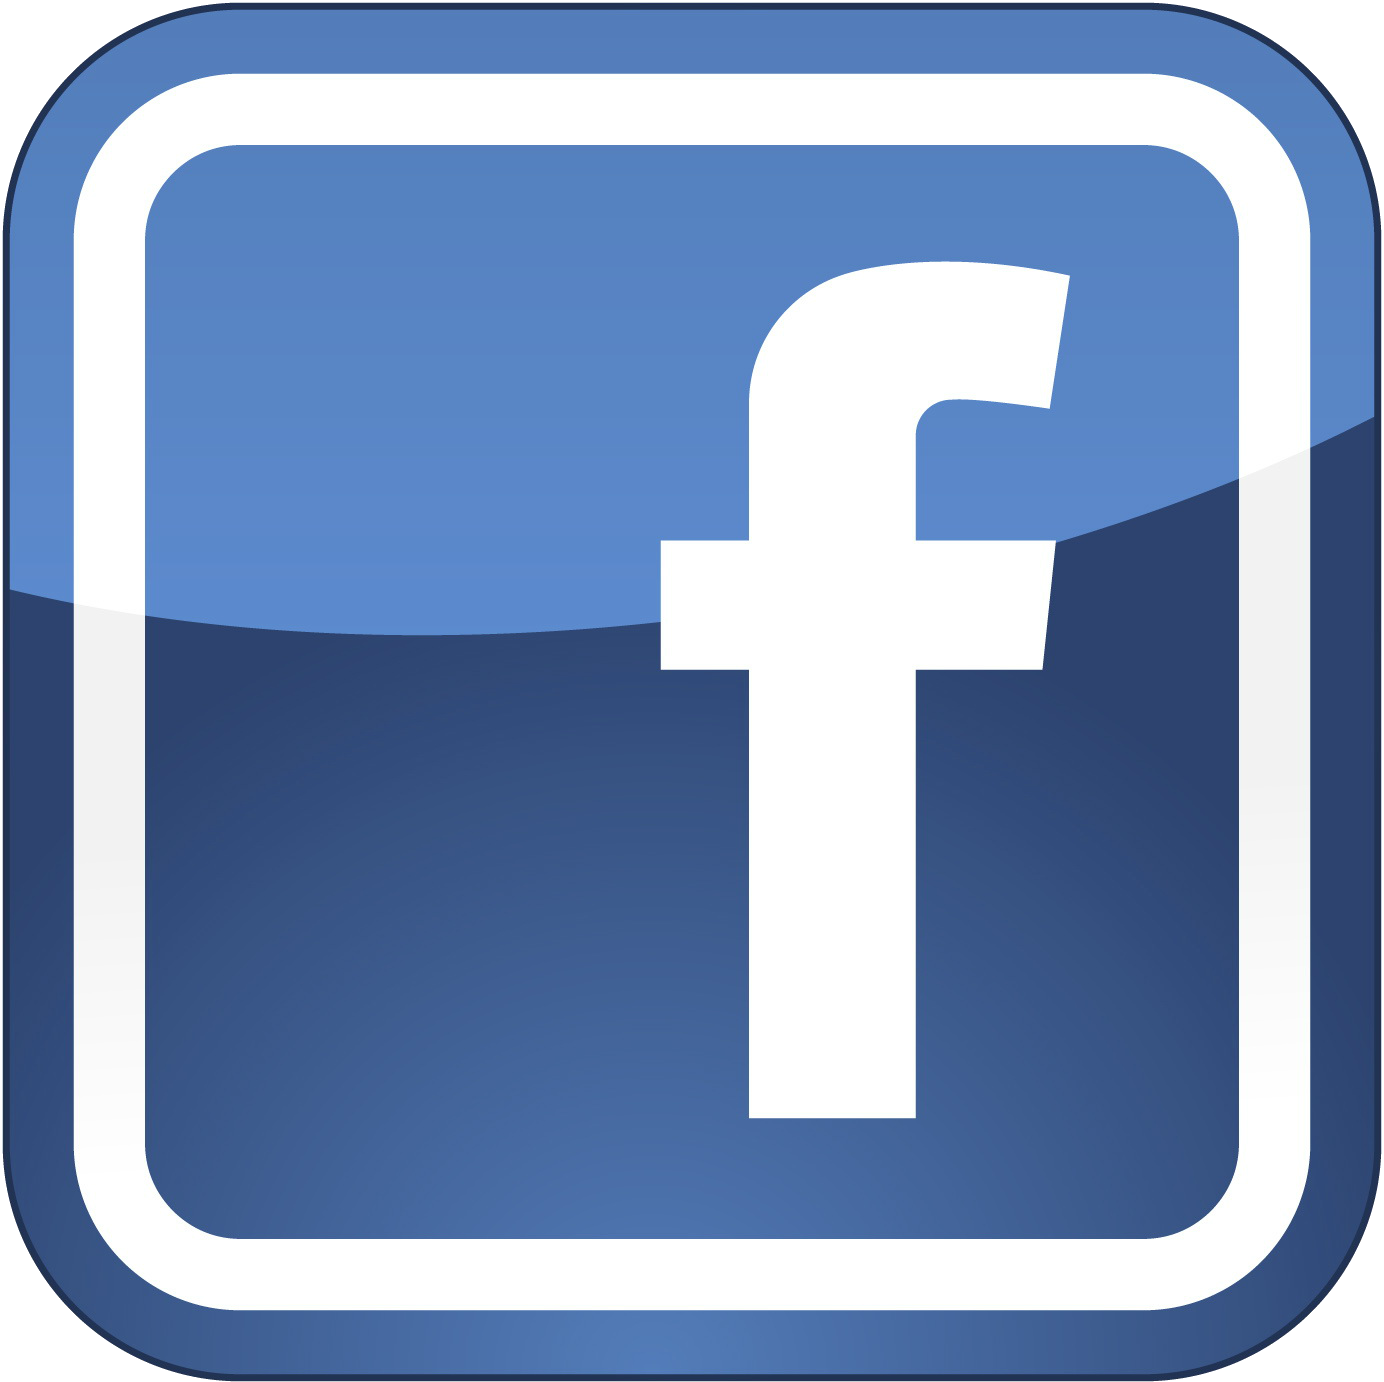 Button Computer Facebook Like Icons HQ Image Free PNG PNG Image